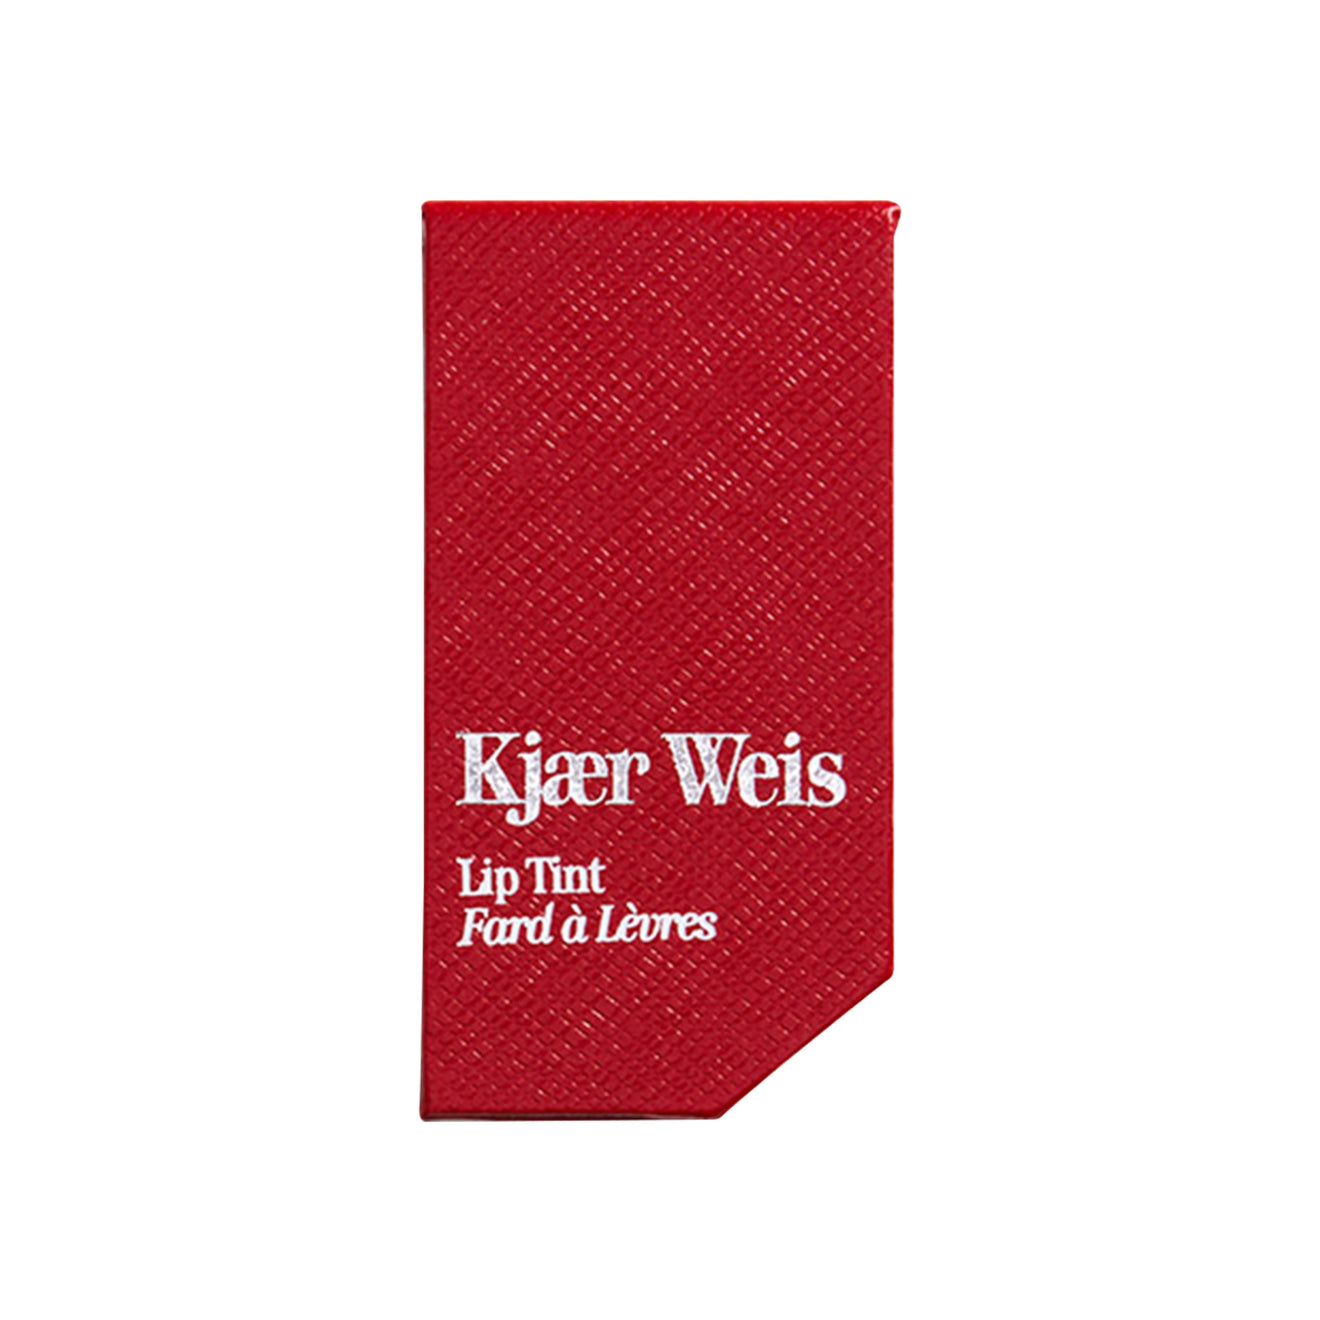 Kjaer Weis Red Edition Lip Tint Compact main image.